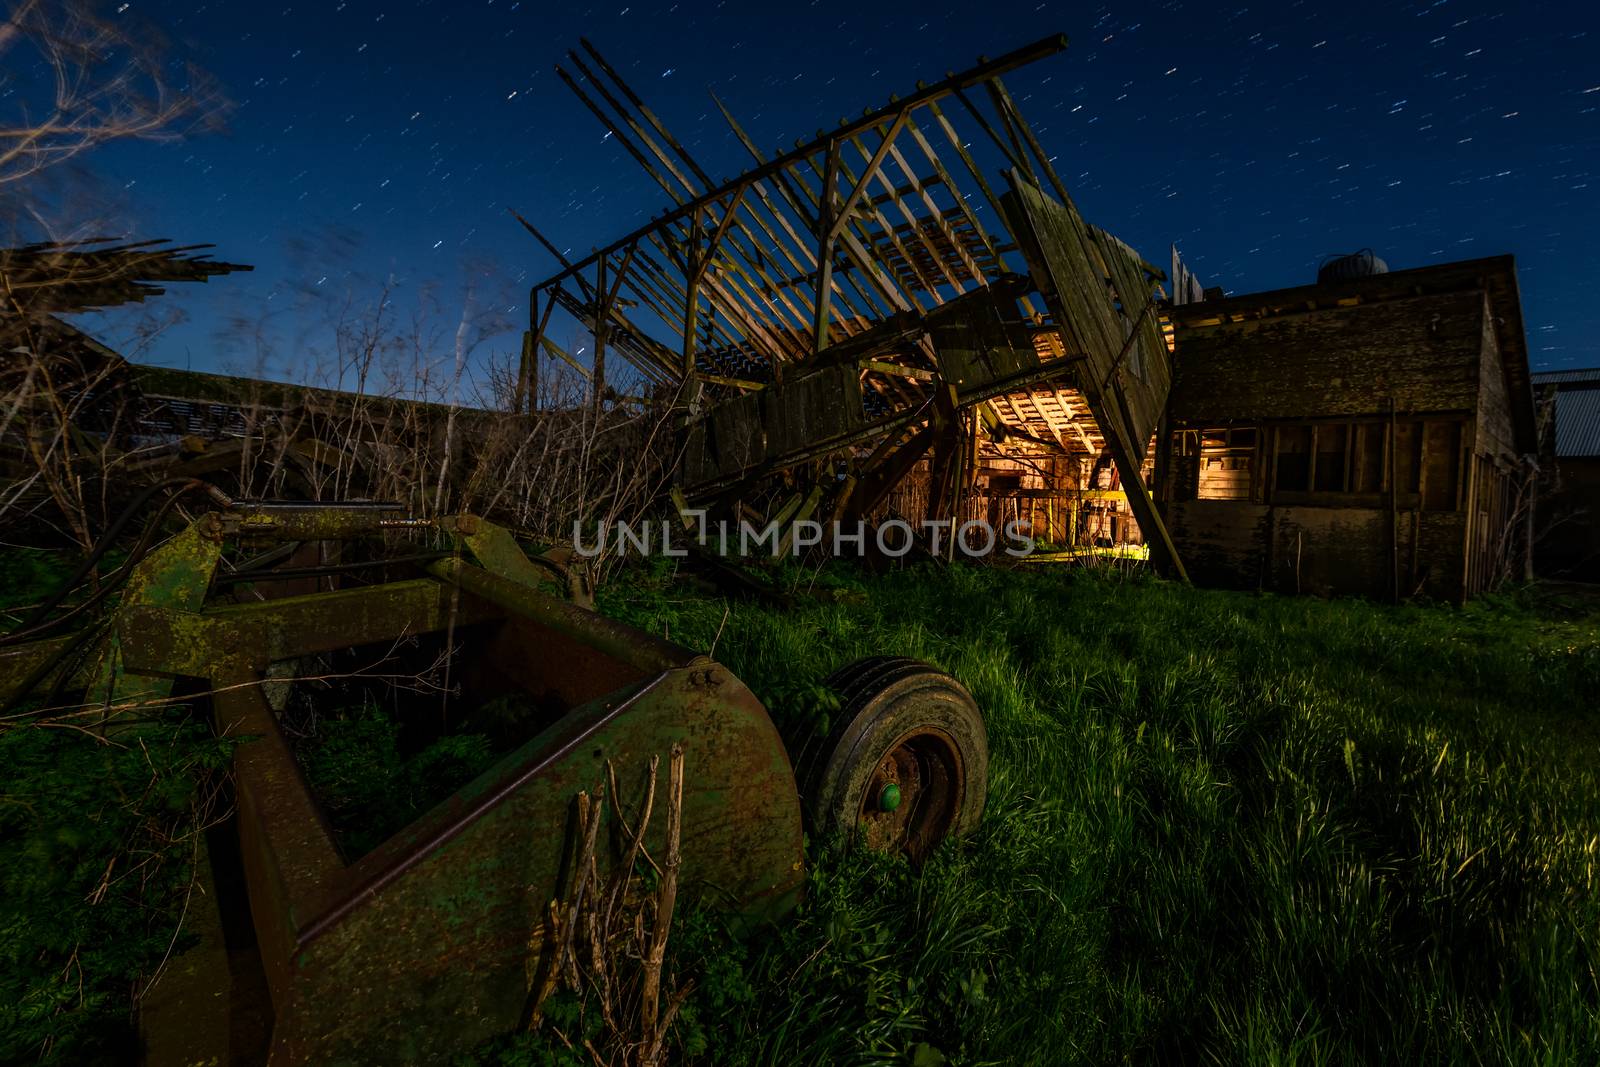 Night at an Abandoned Farm in California by backyard_photography